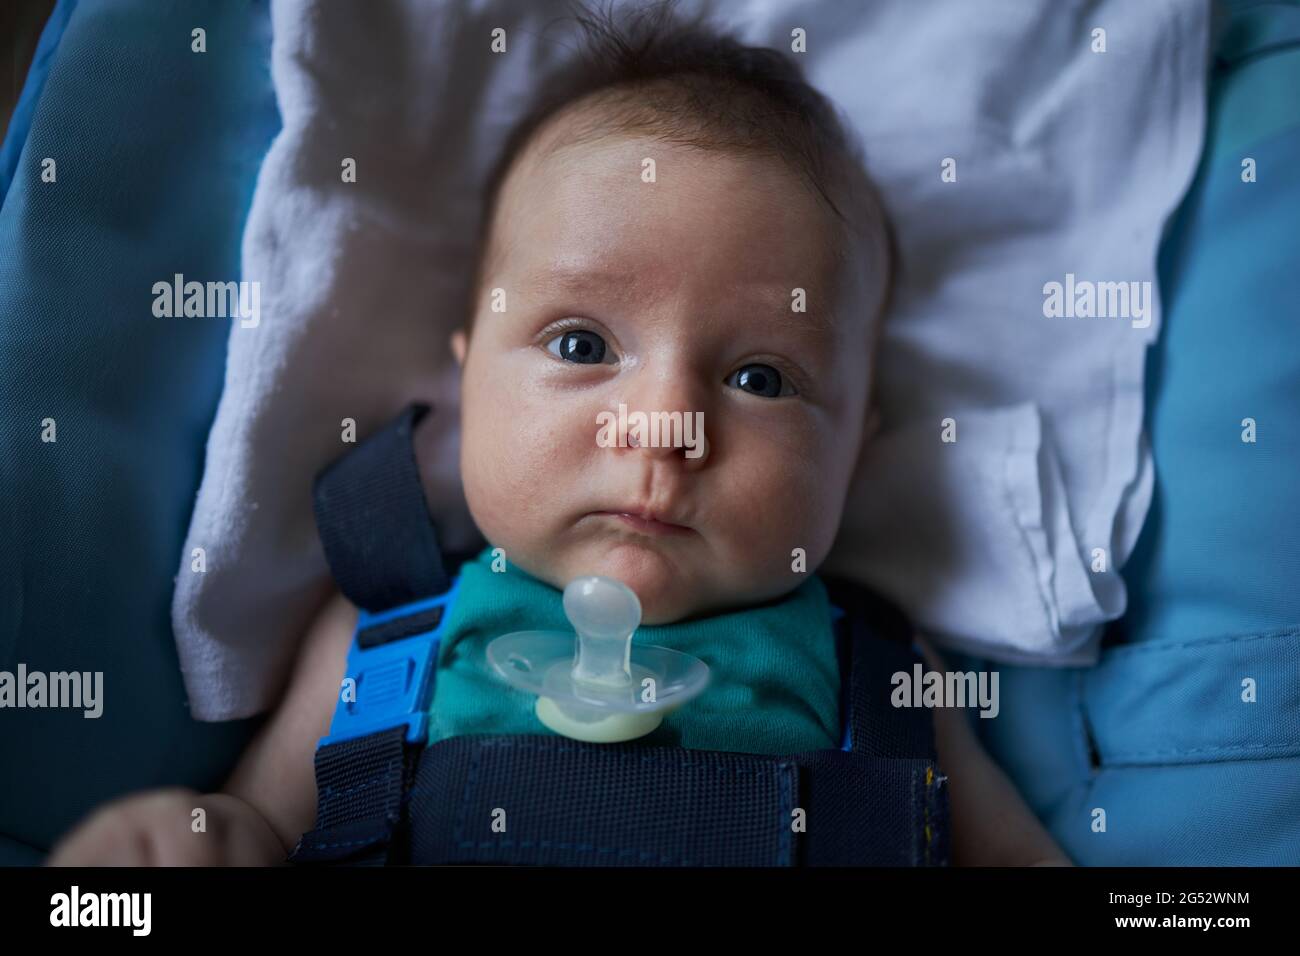 Small baby laying and wondering Stock Photo